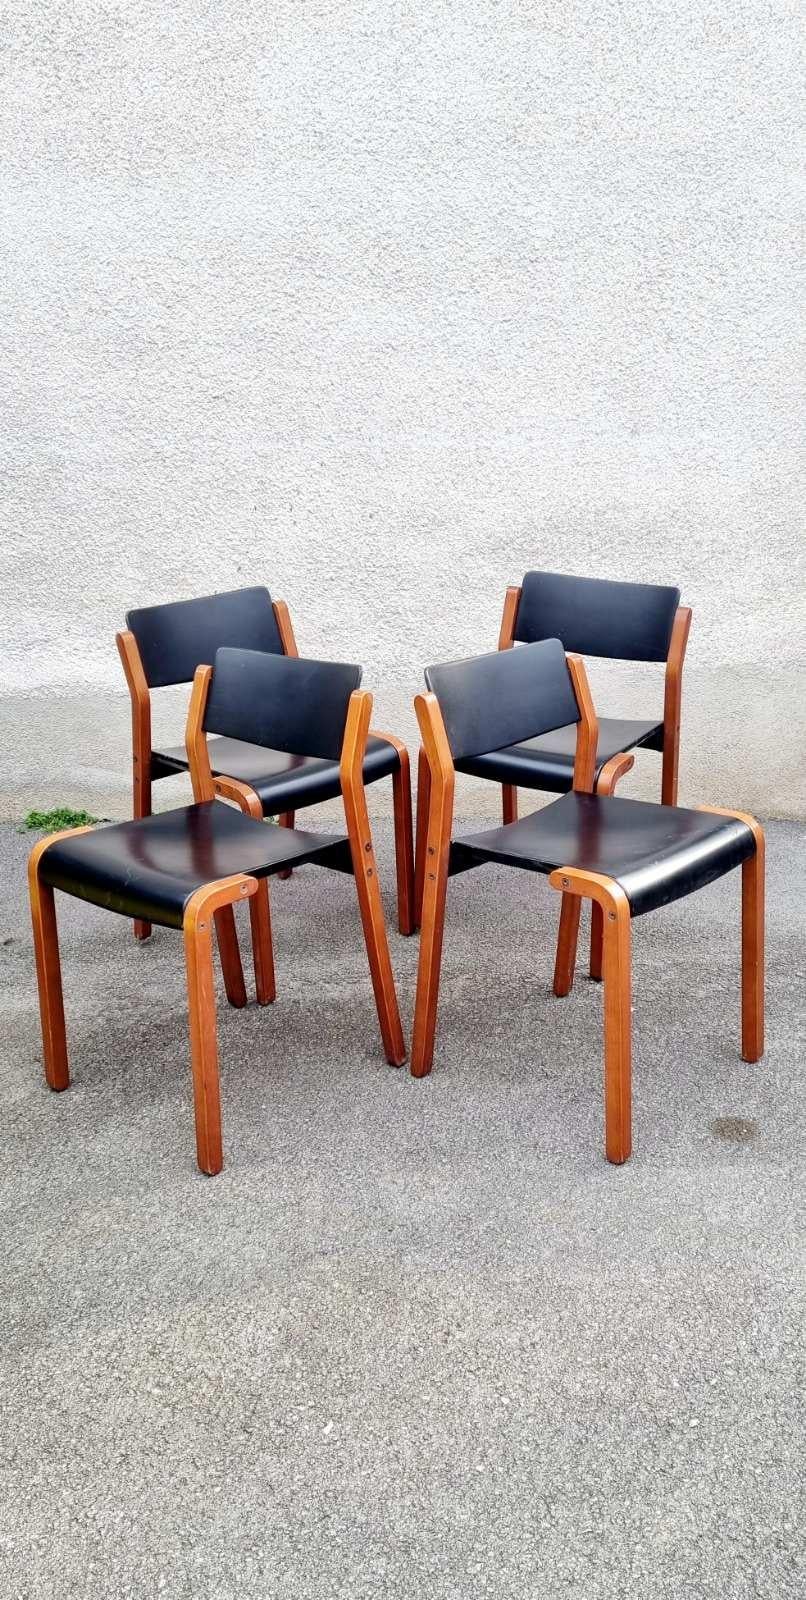 Rare set of 4 Italian modern Gruppo model chairs designed by De Pas, D'Urbino and Lomazzi for Bellato in 1979.
Chairs mod. Group with light wood structure with square section legs and curved seat and back in black wood.
Designed by the DDL group